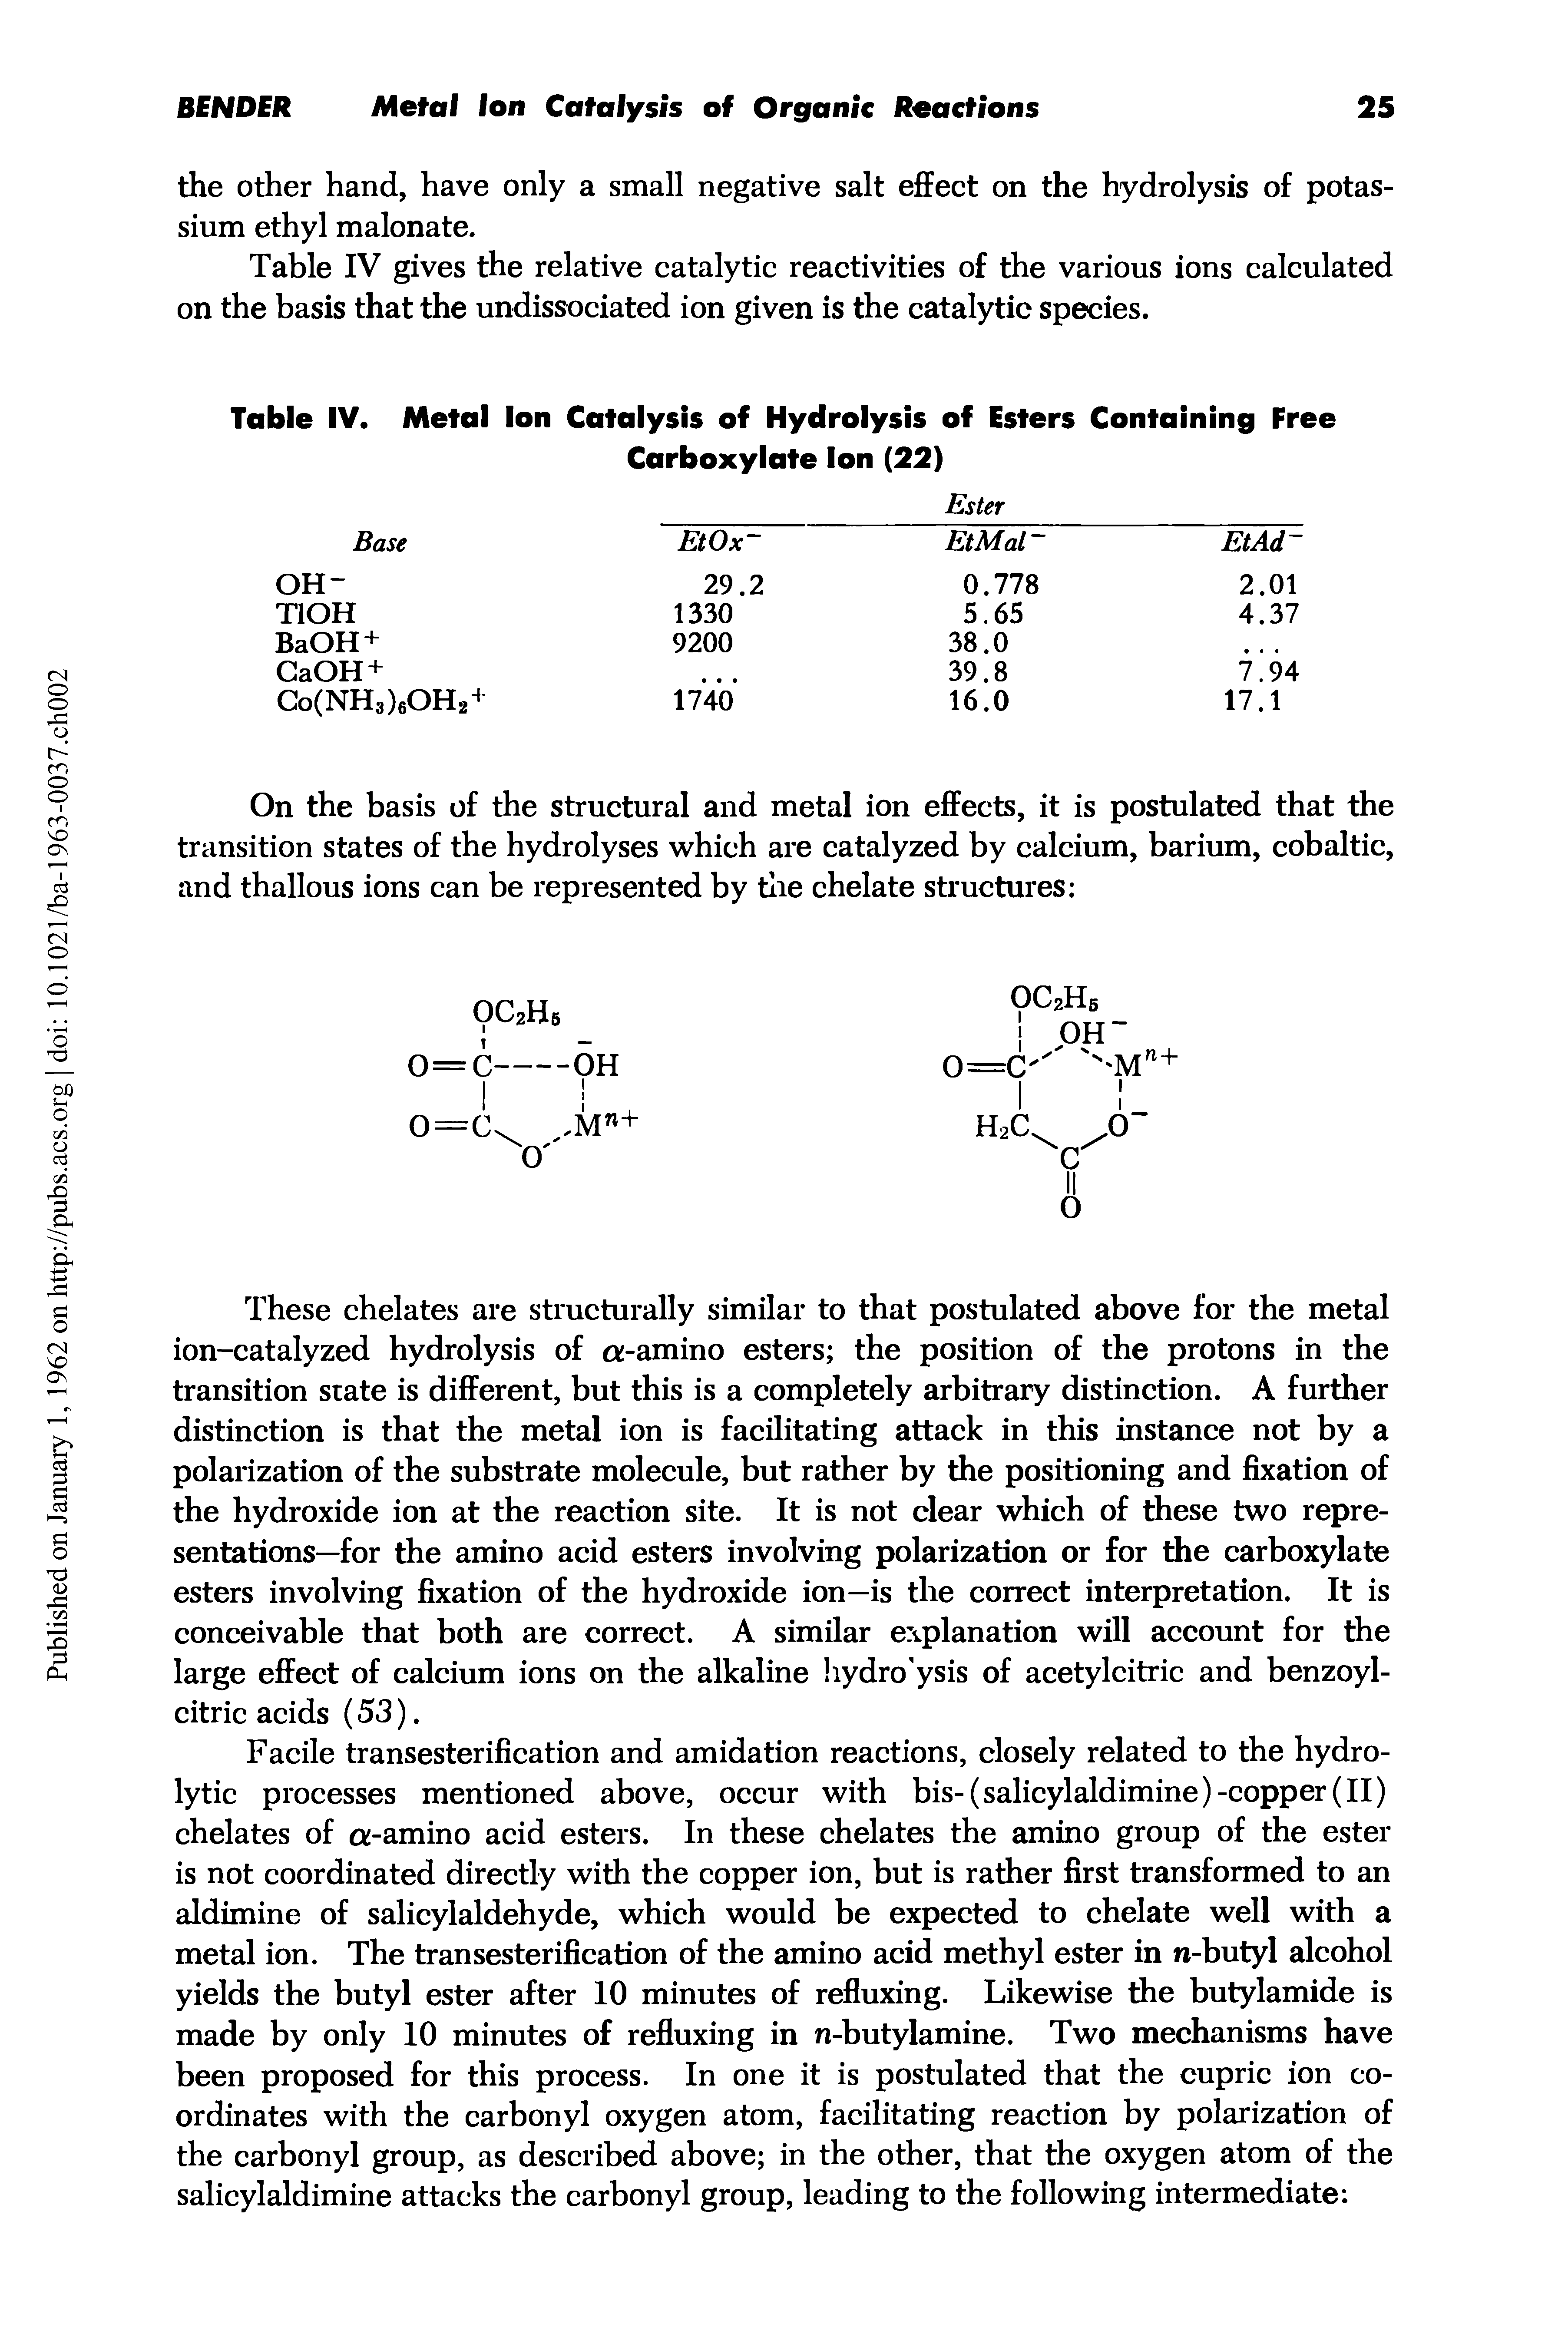 Table IV gives the relative catalytic reactivities of the various ions calculated on the basis that the undissociated ion given is the catalytic species.